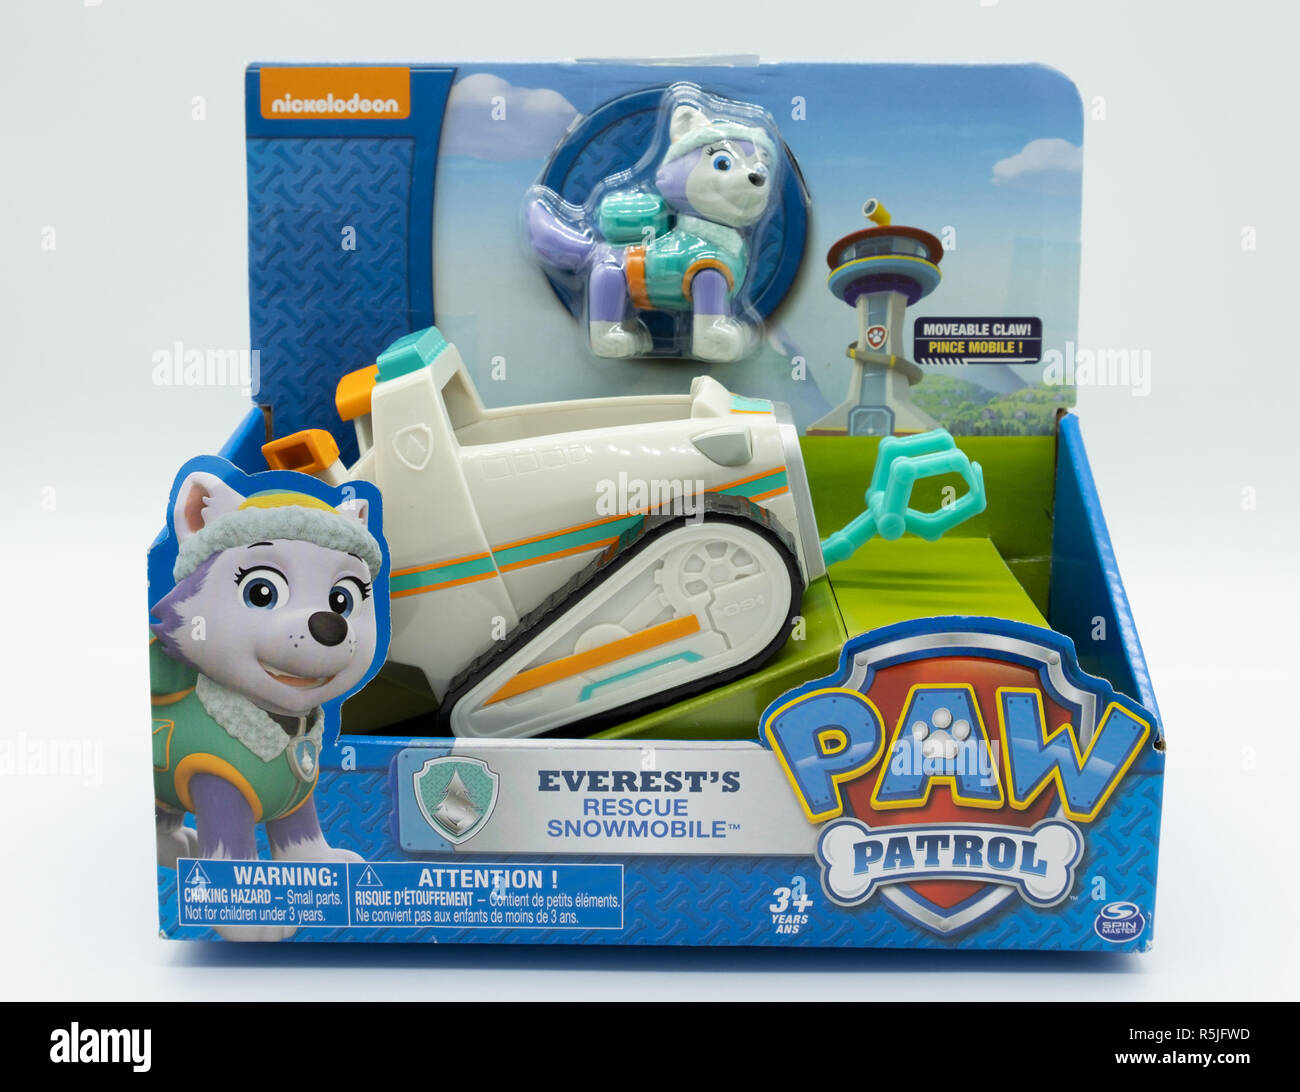 Largs, Scotland, UK - 2018: Nickelodeon branded Paw patrol toy in recyclable packaging and in line with current UK guidelines Stock Photo - Alamy